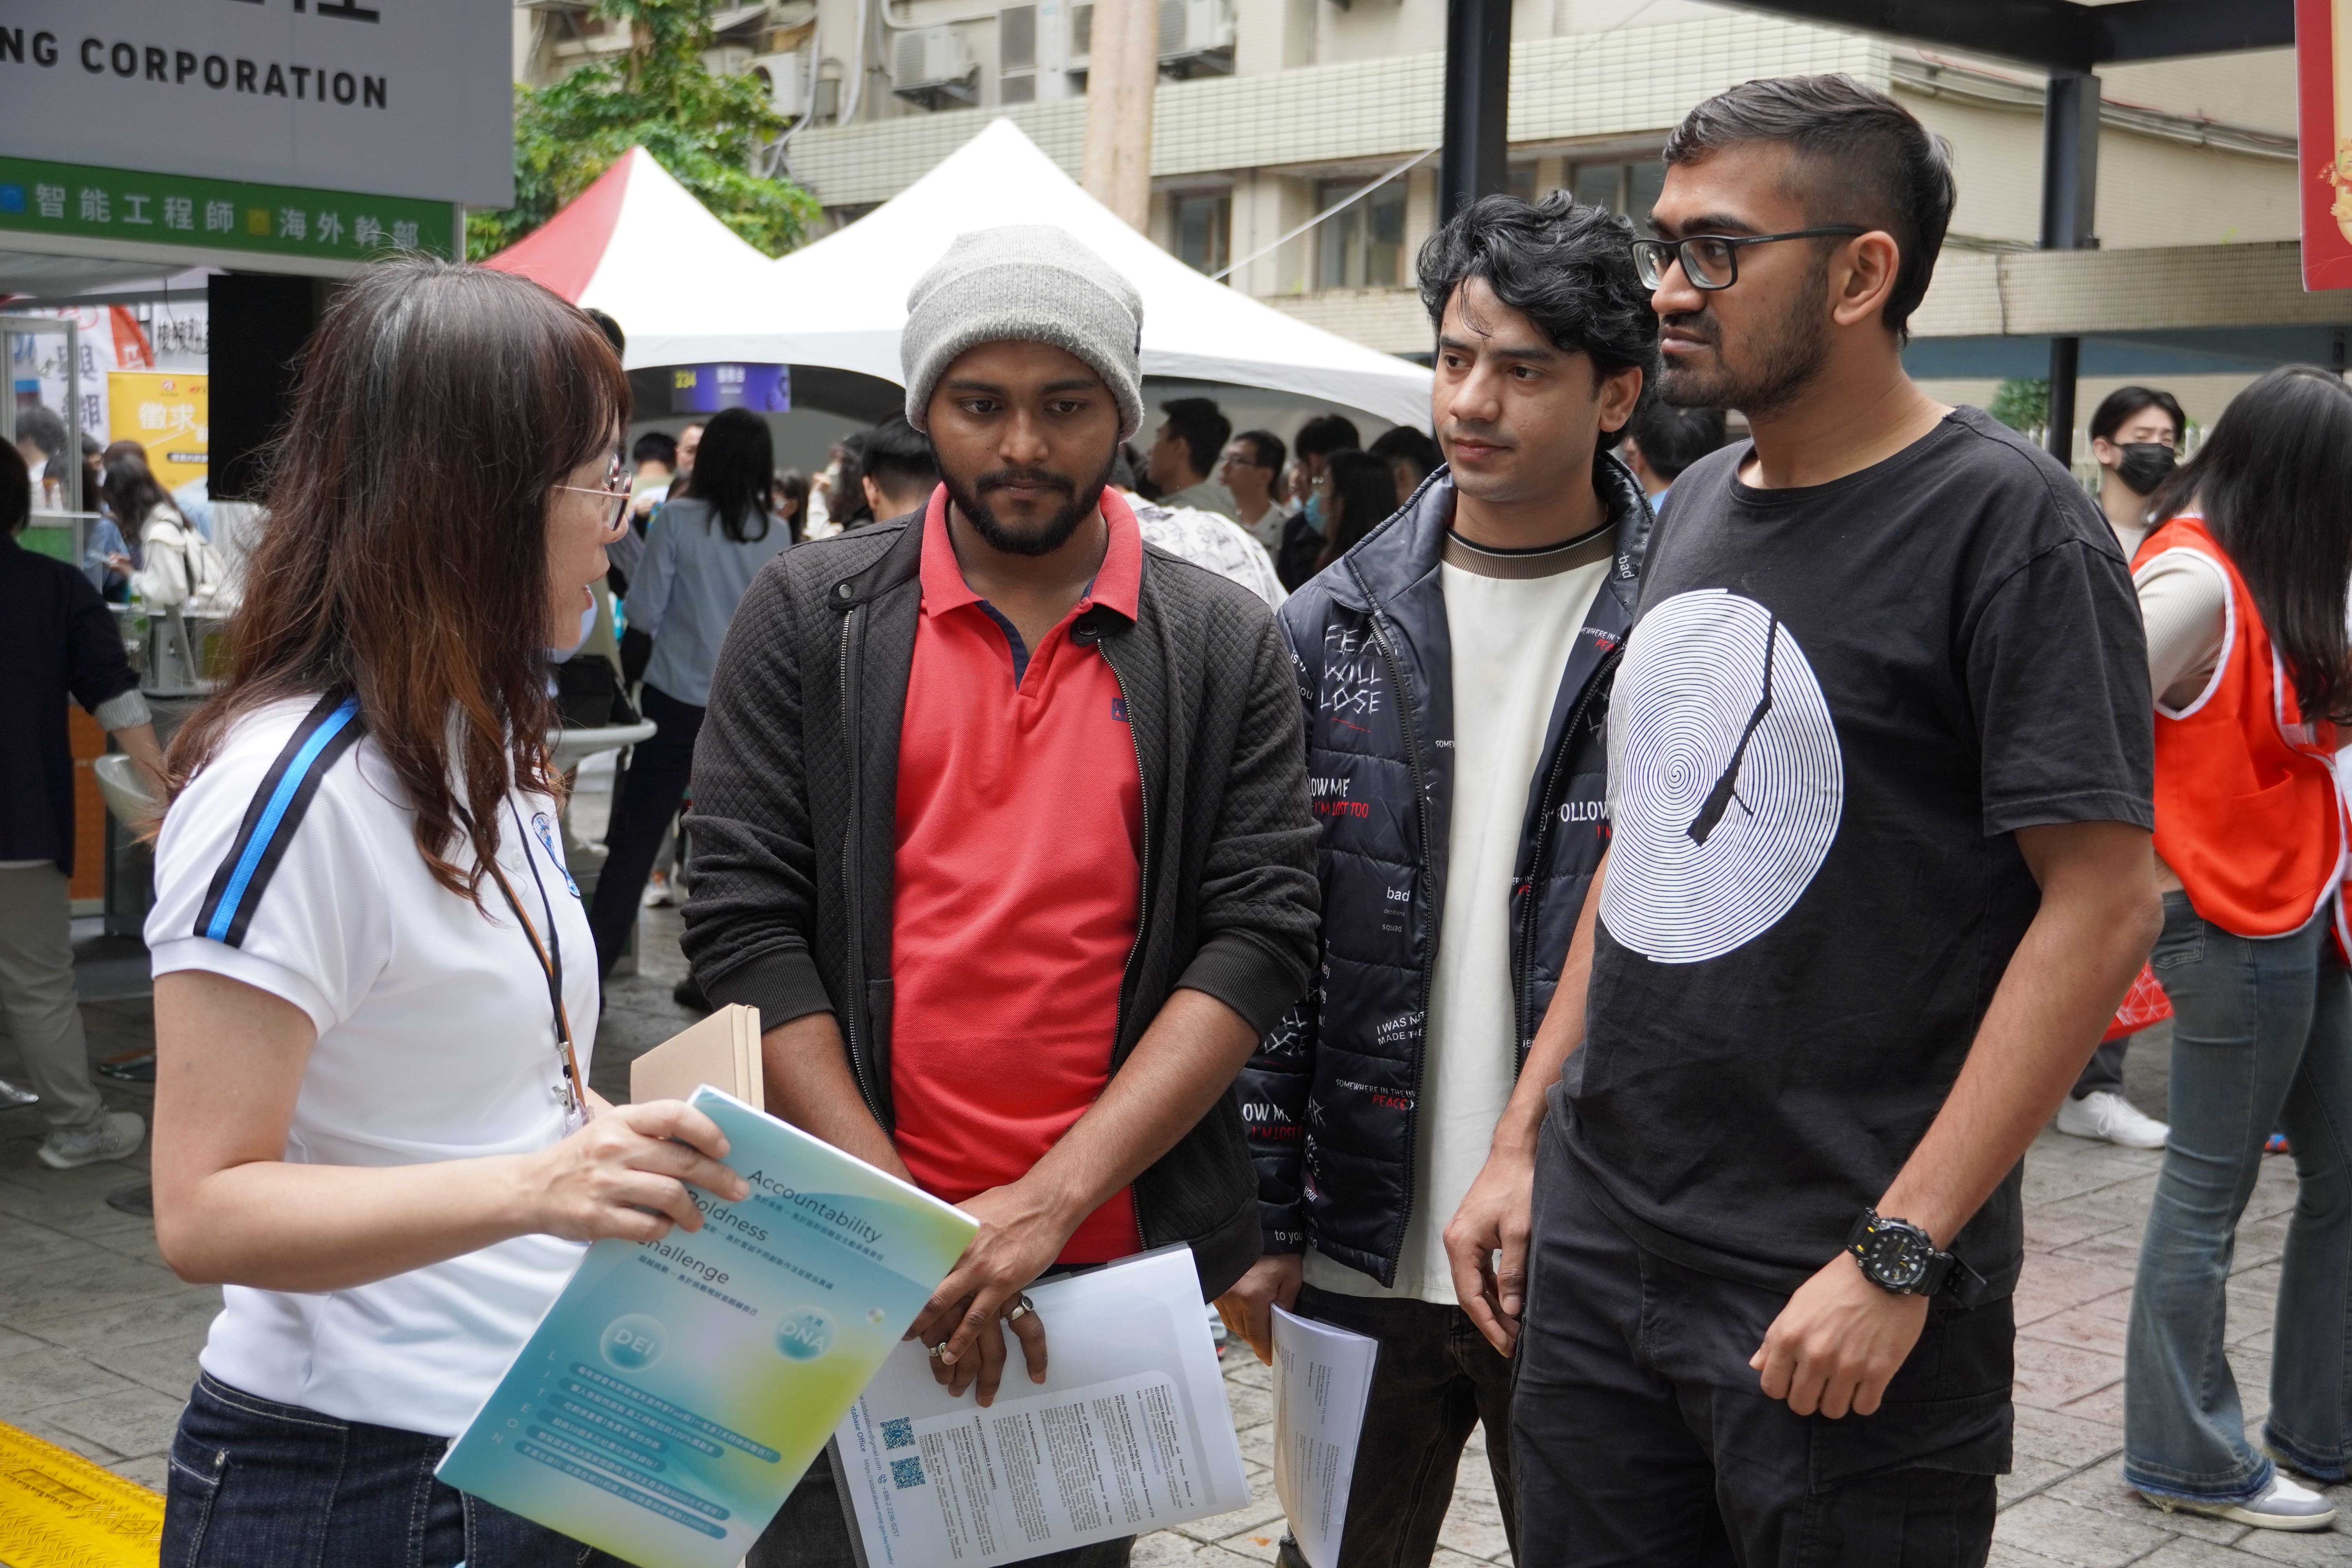 Approximately 12% of Taiwan Tech's students are international students. The image shows foreign students inquiring at the booths.